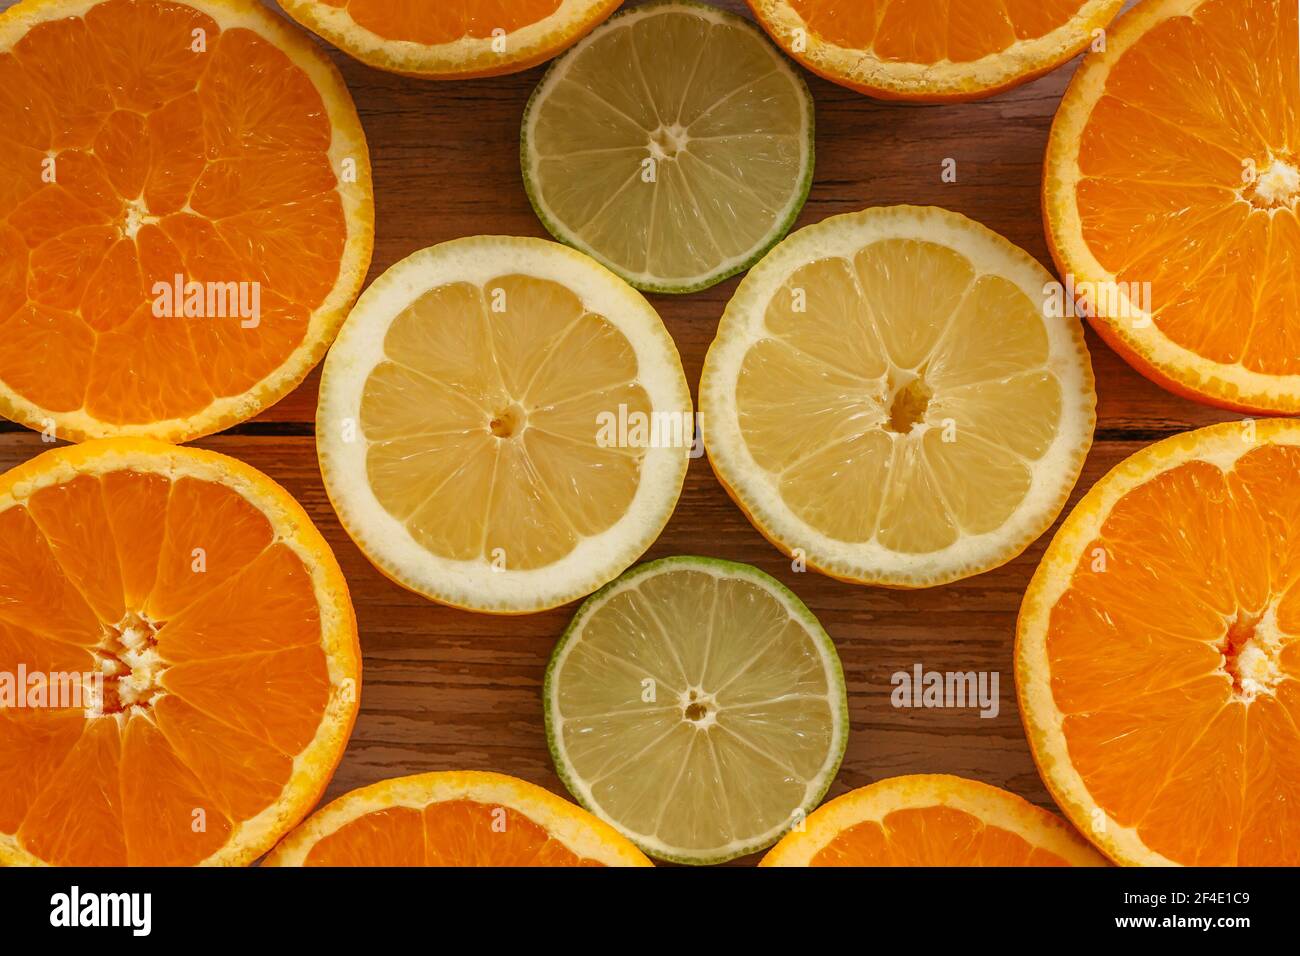 Oranges,limes and lemons slides on wooden table view from above. Beautiful background with fresh fruit half cut.Healthy eating vitamin C.Summer tropic Stock Photo